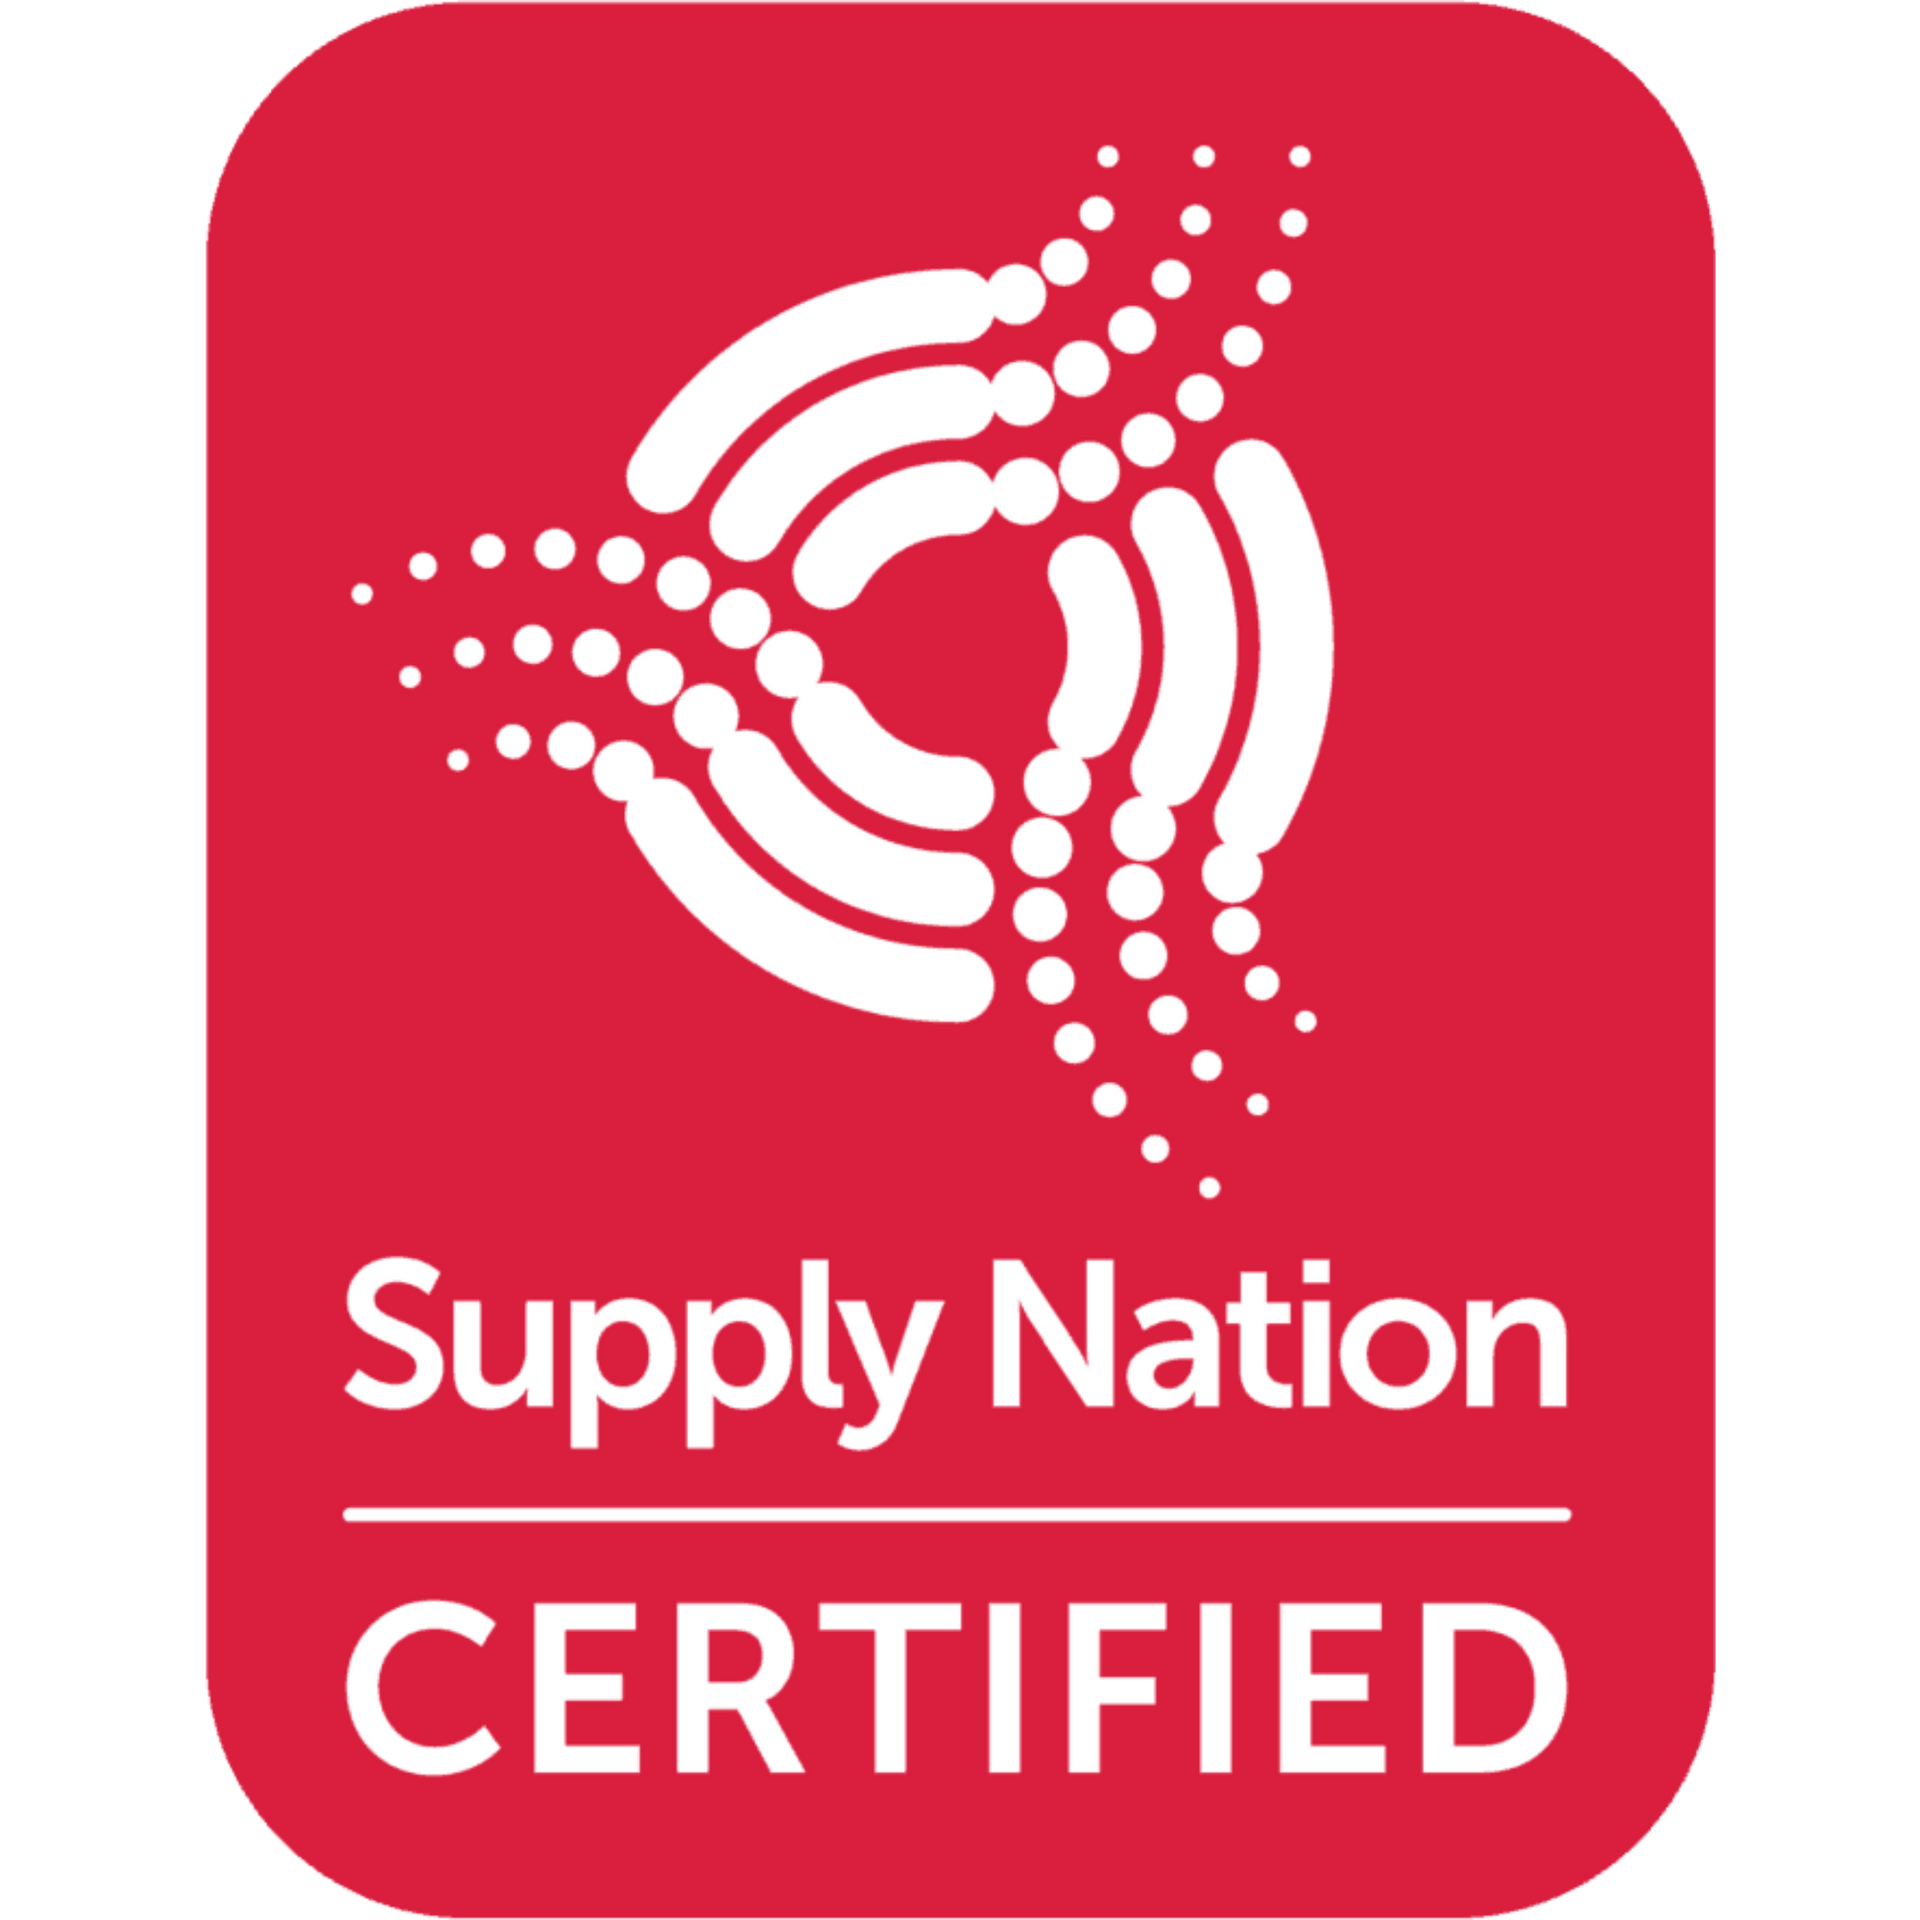 Supply Nation Certified Accreditation